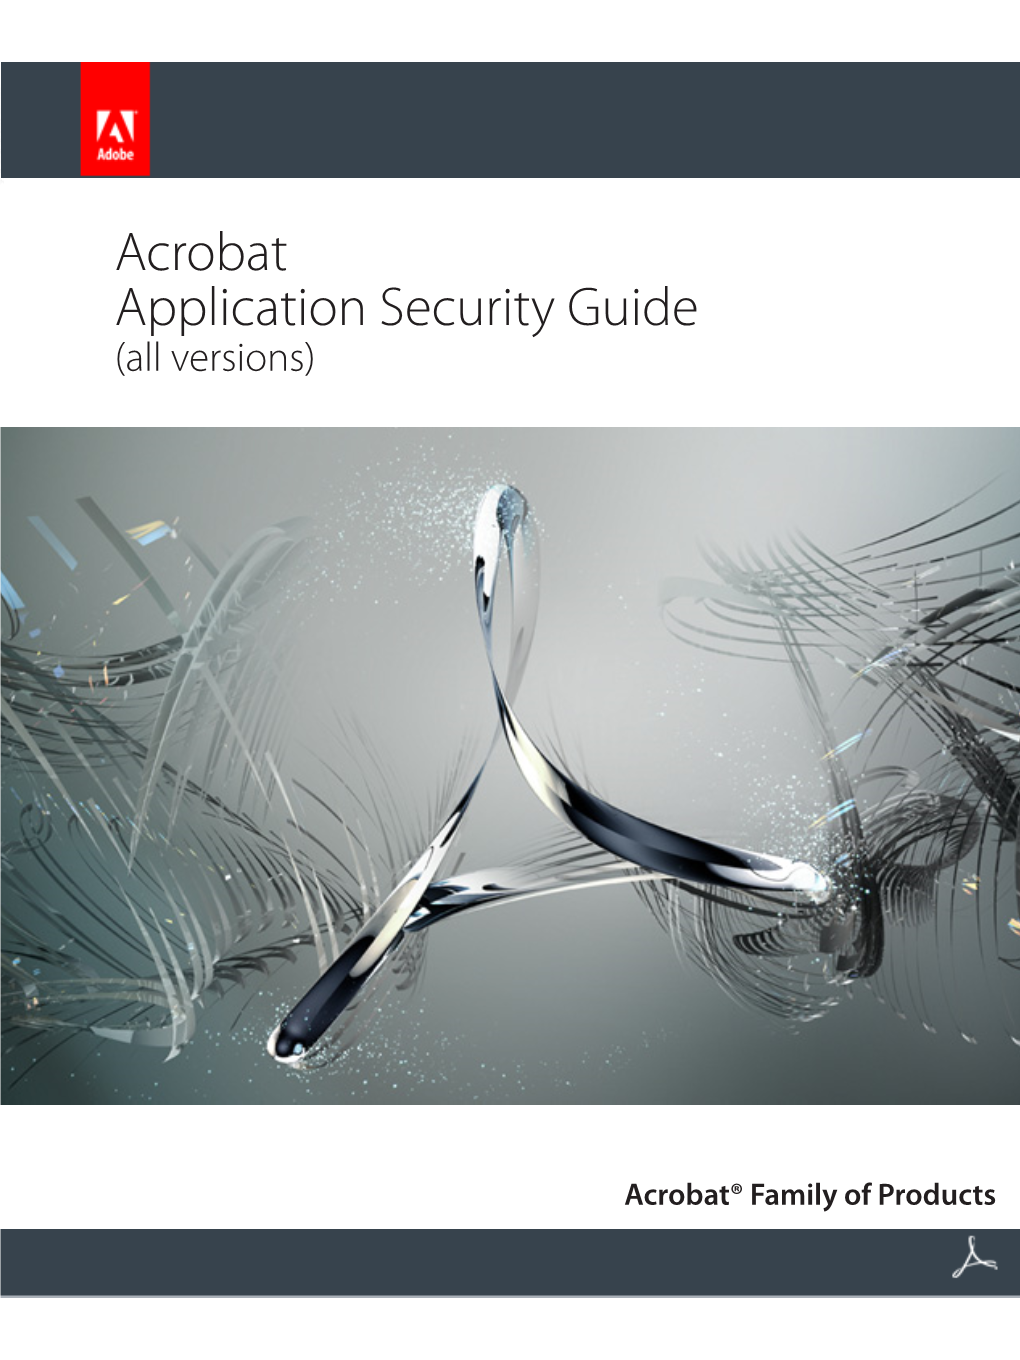 Acrobat Application Security Guide (All Versions)